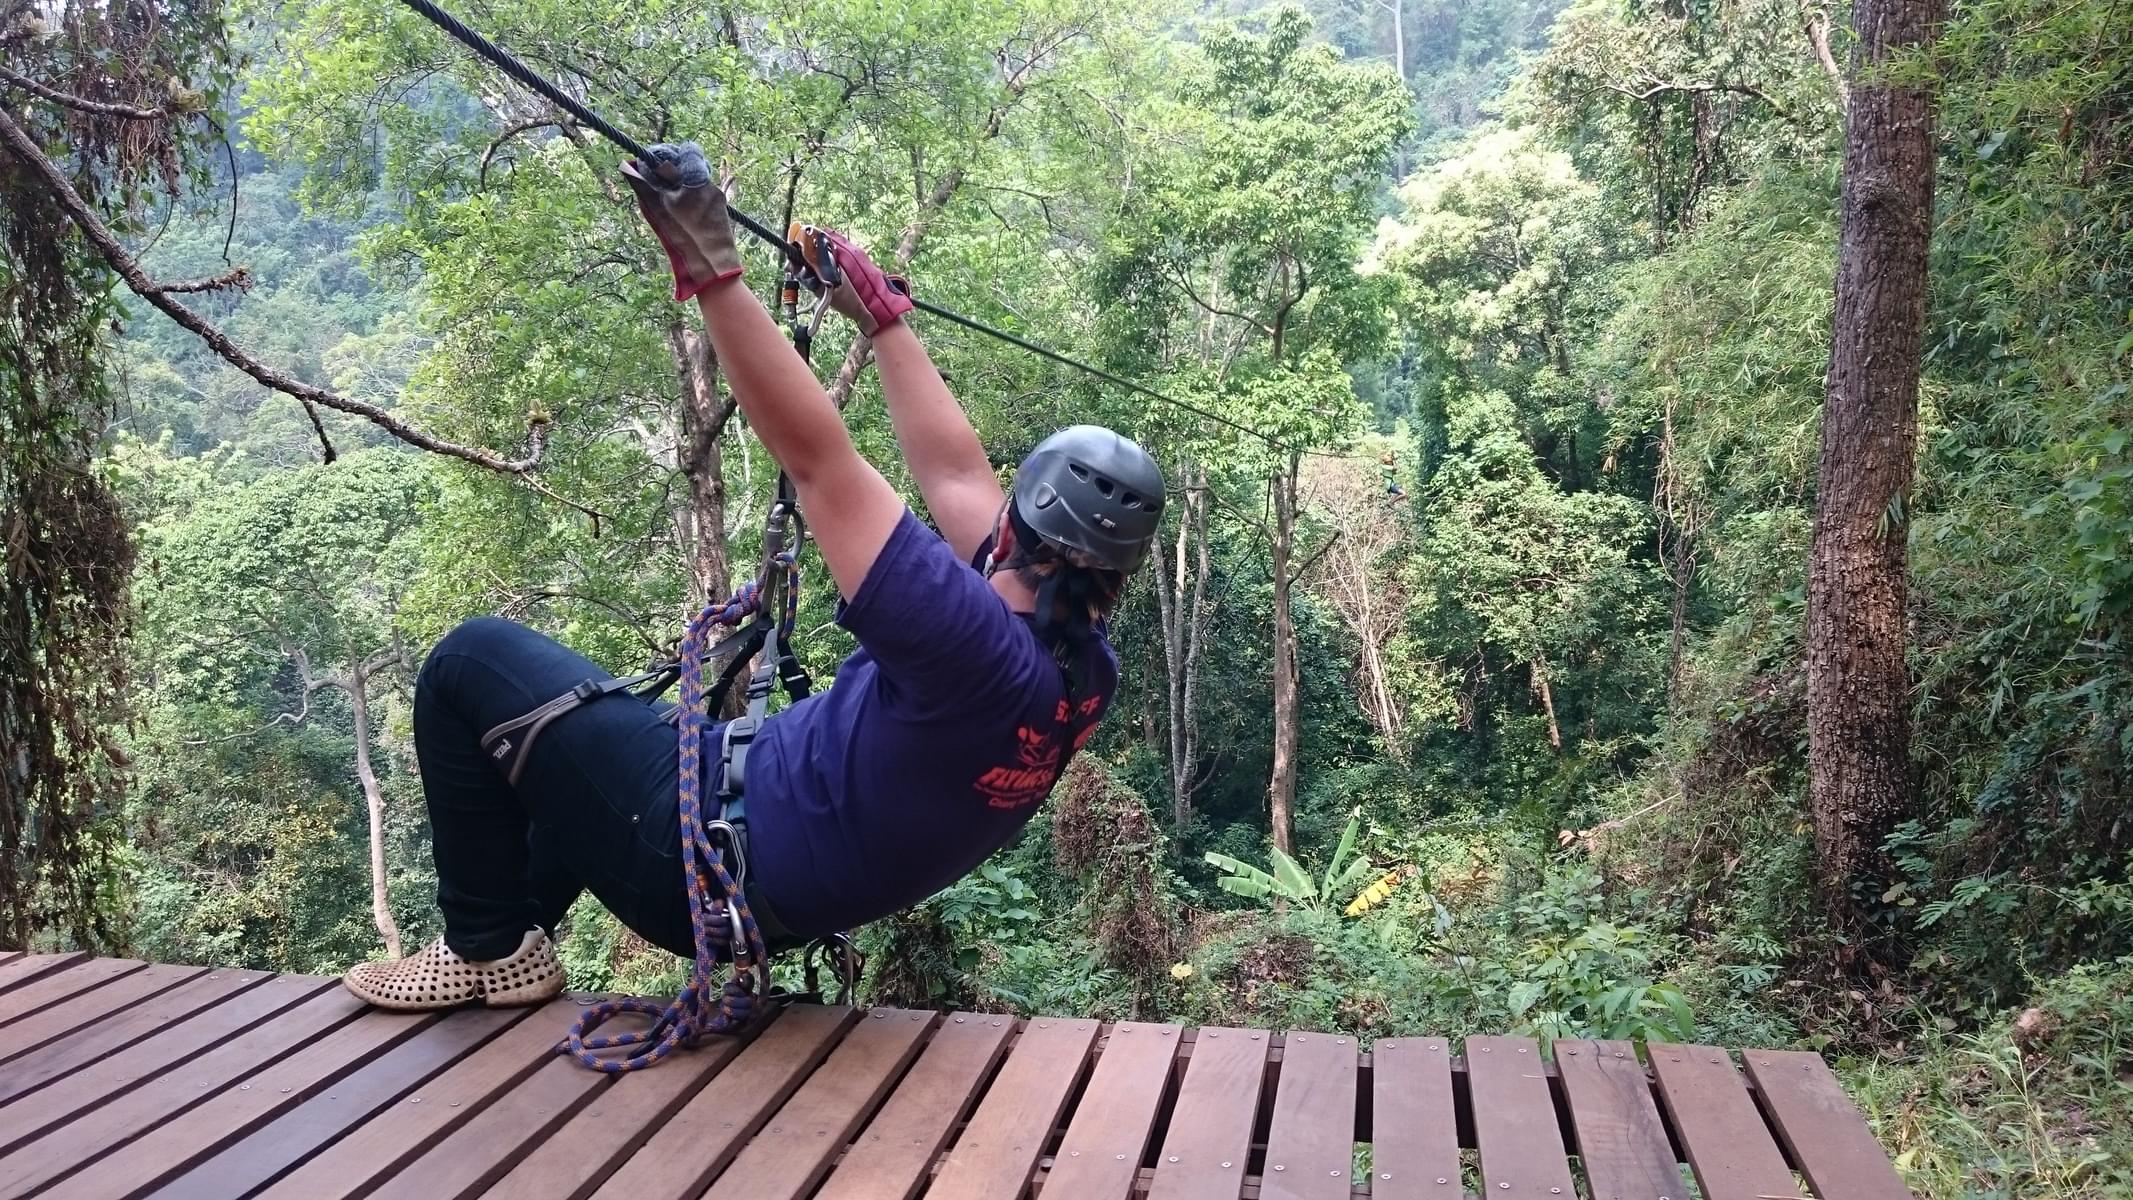 Why Experience Zipline in Chiang Mai